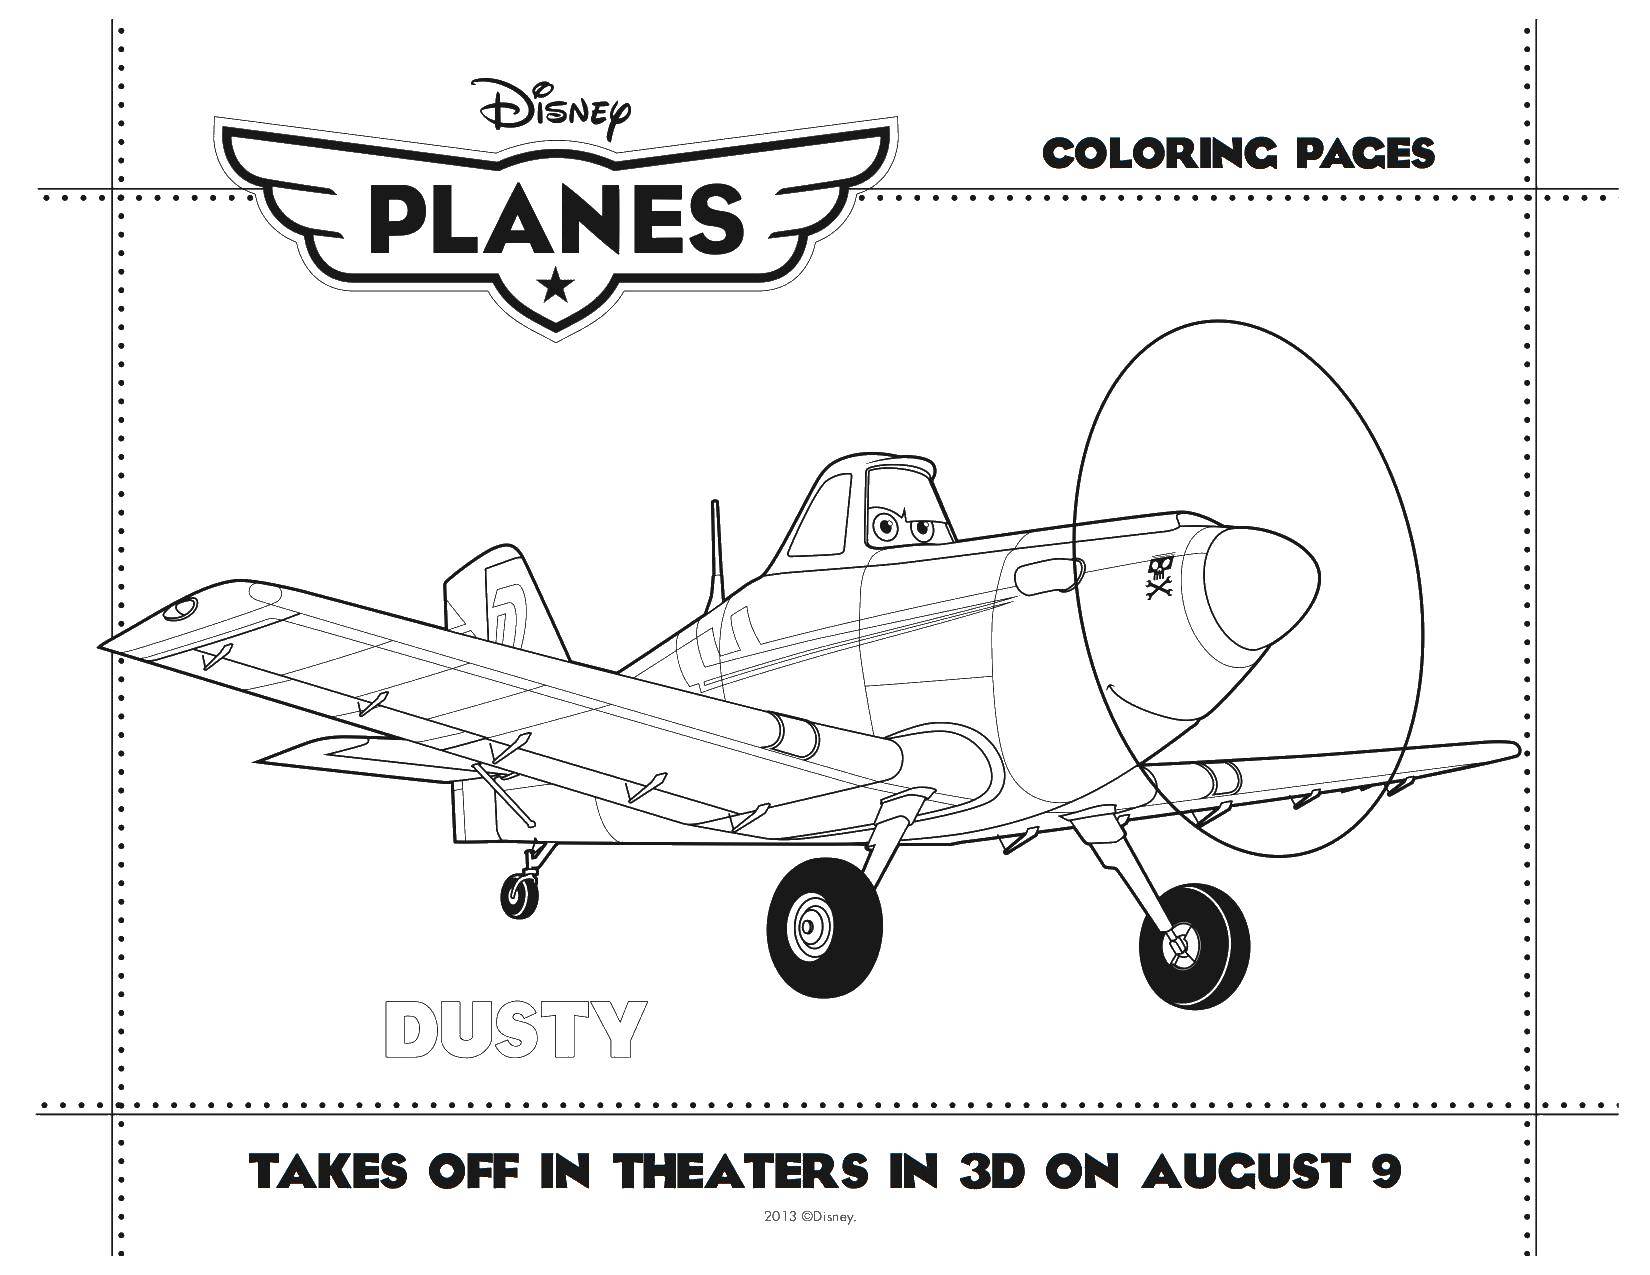 Coloring Plane dusty. Category Disney cartoons. Tags:  The Plane, Dusty.